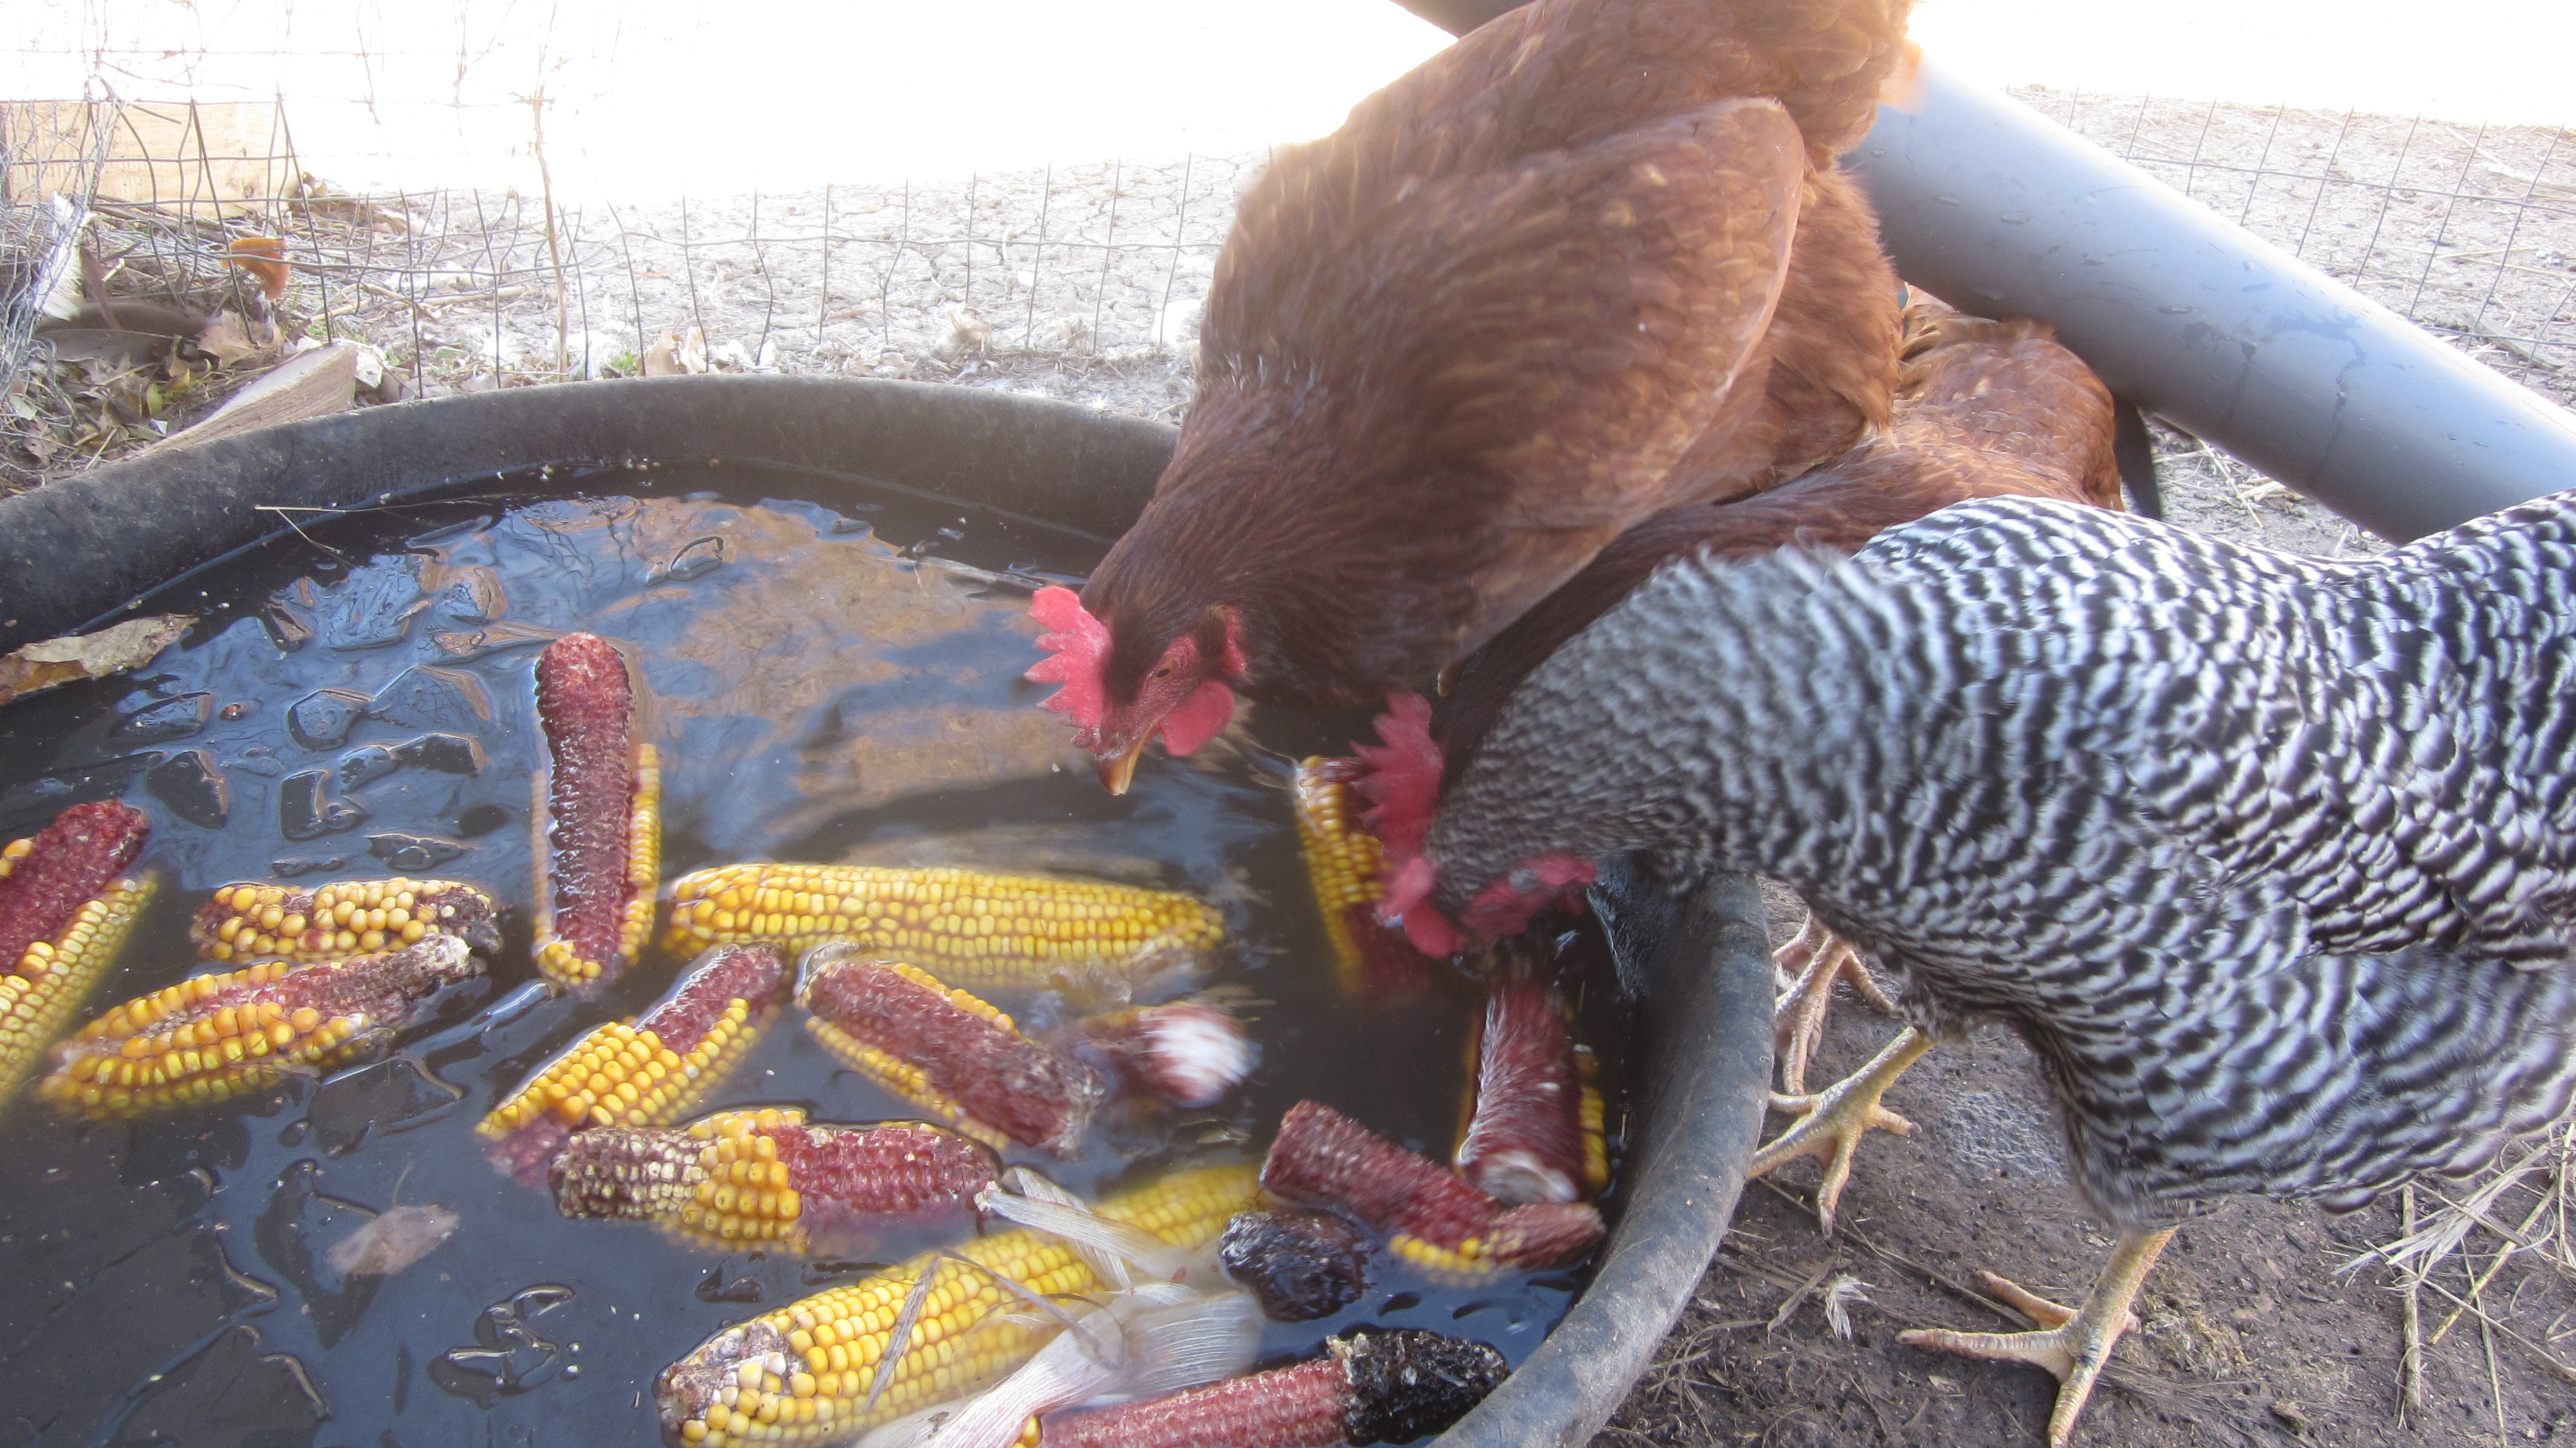 Surprising chickens: bobbing for corn on the cob, and winter feeding tips